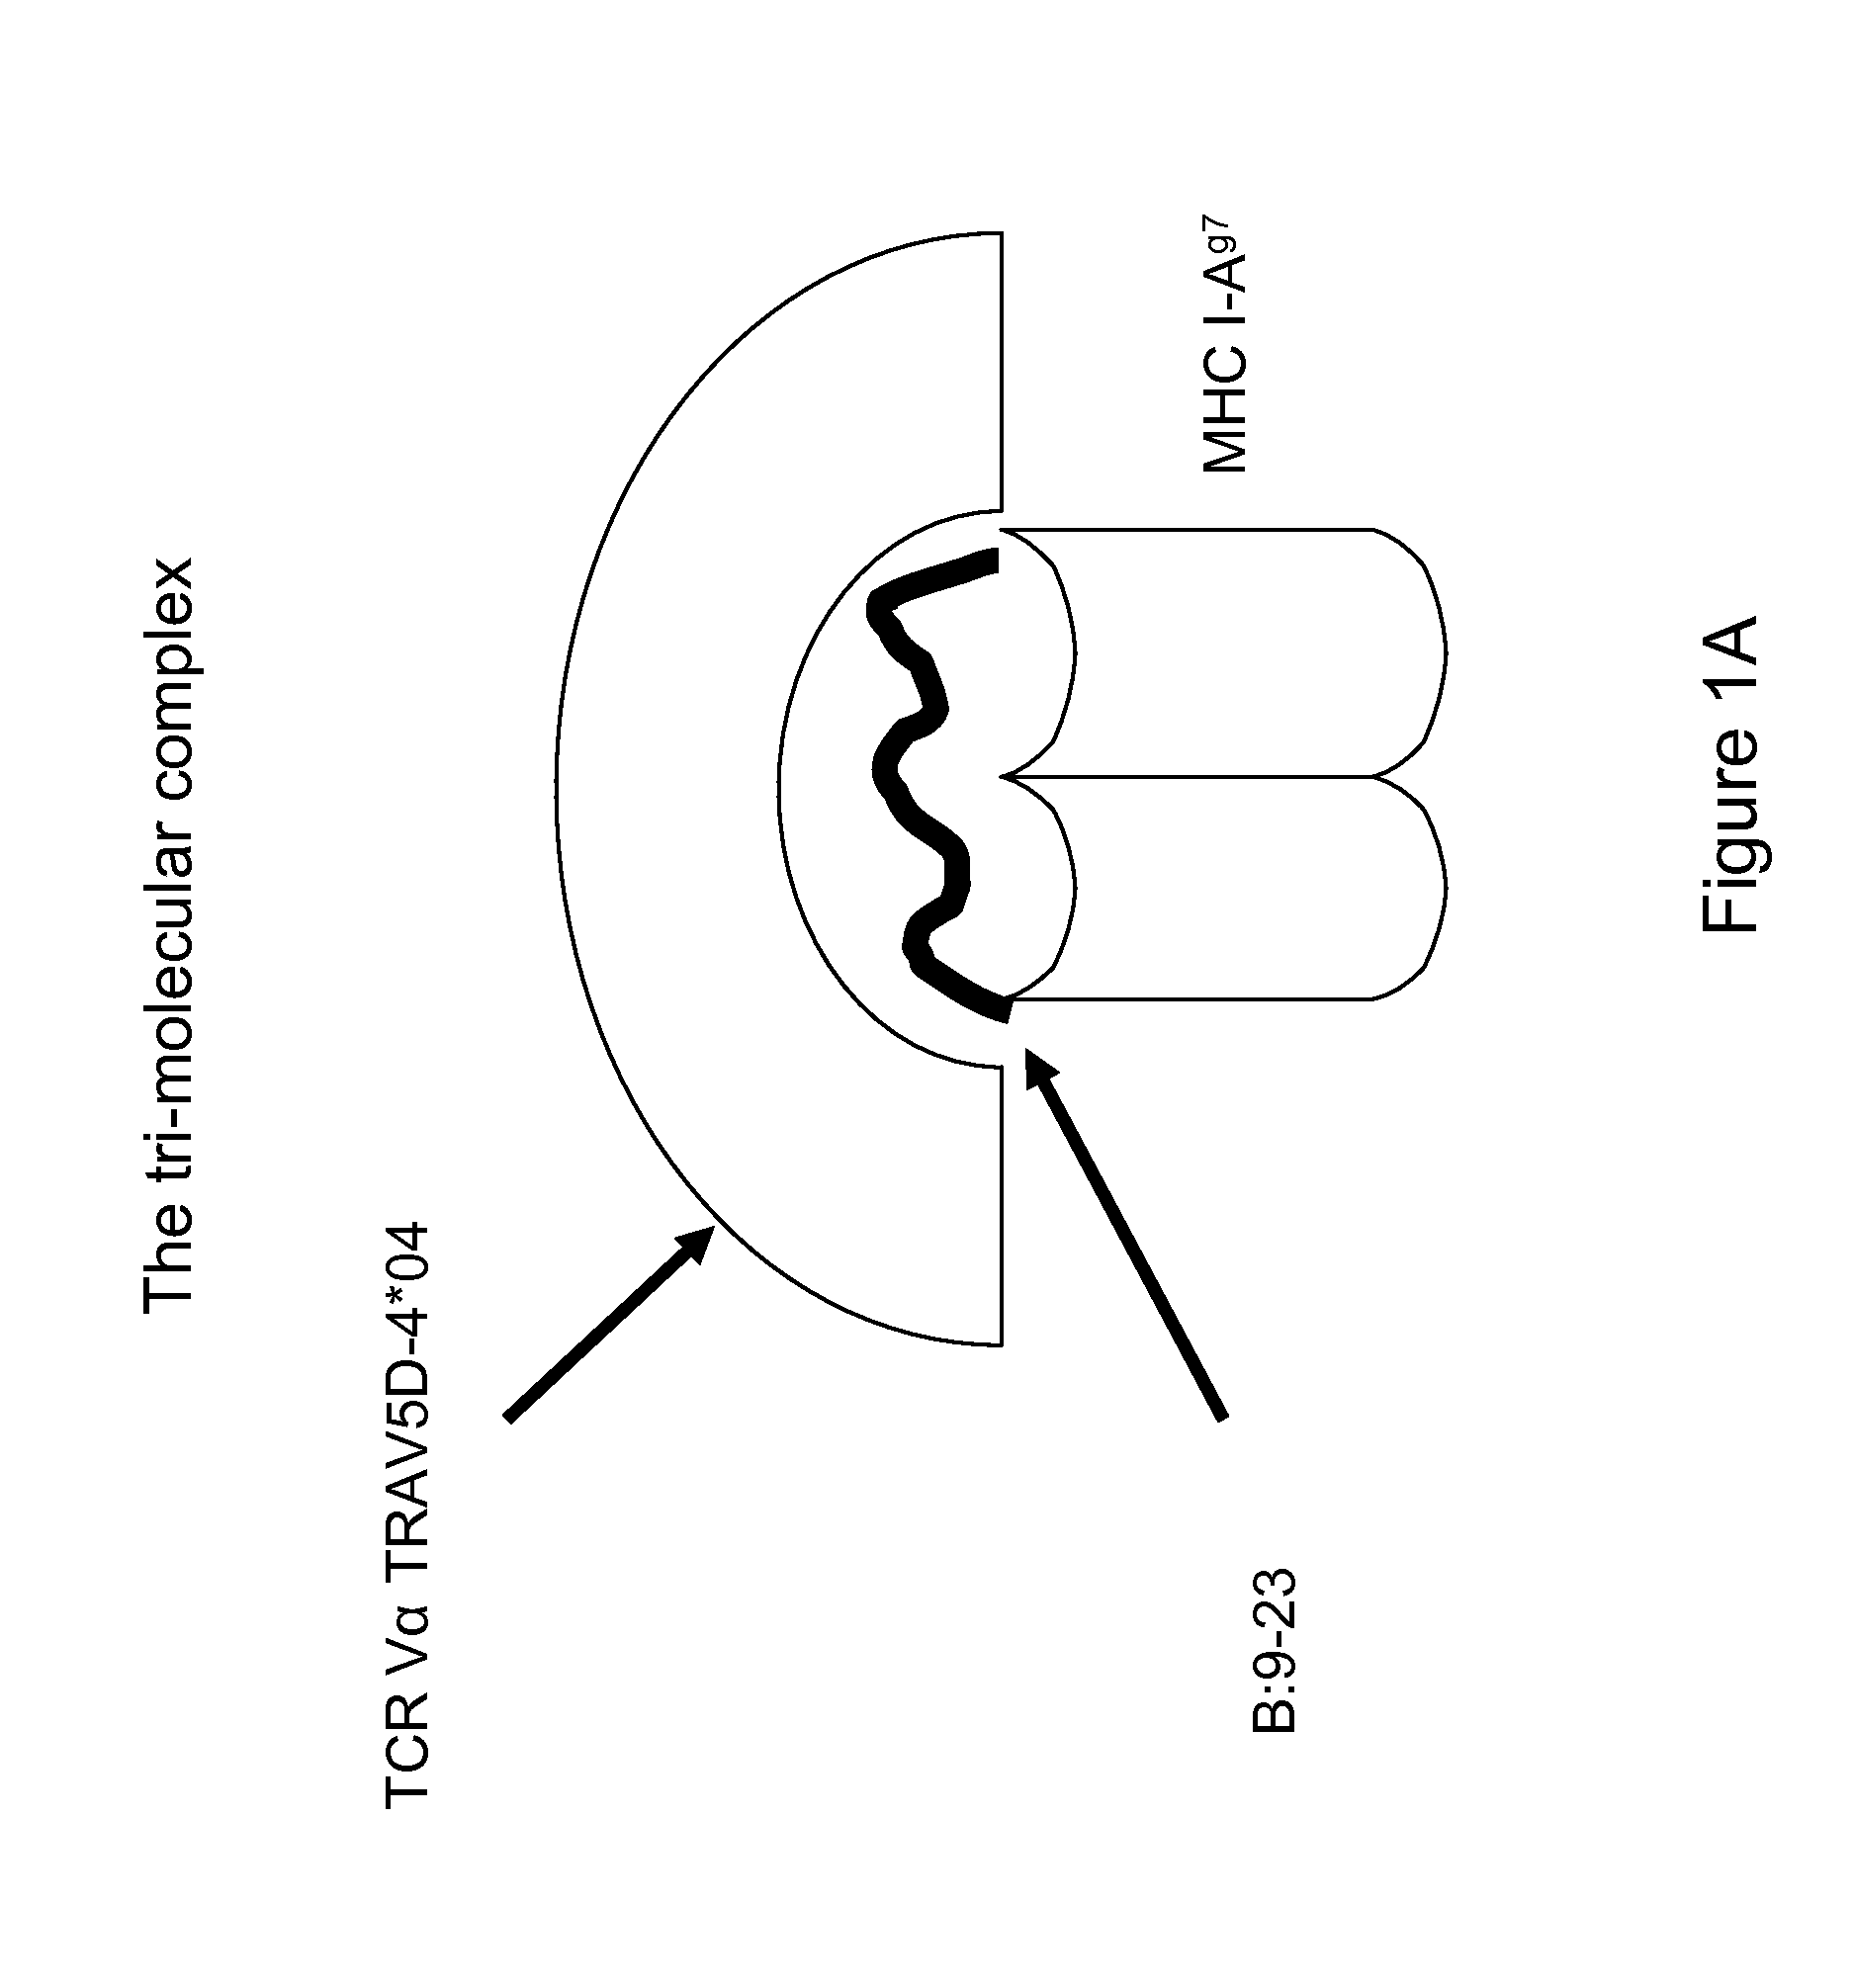 Therapeutic compositions and methods for the prevention of autoimmune diseases